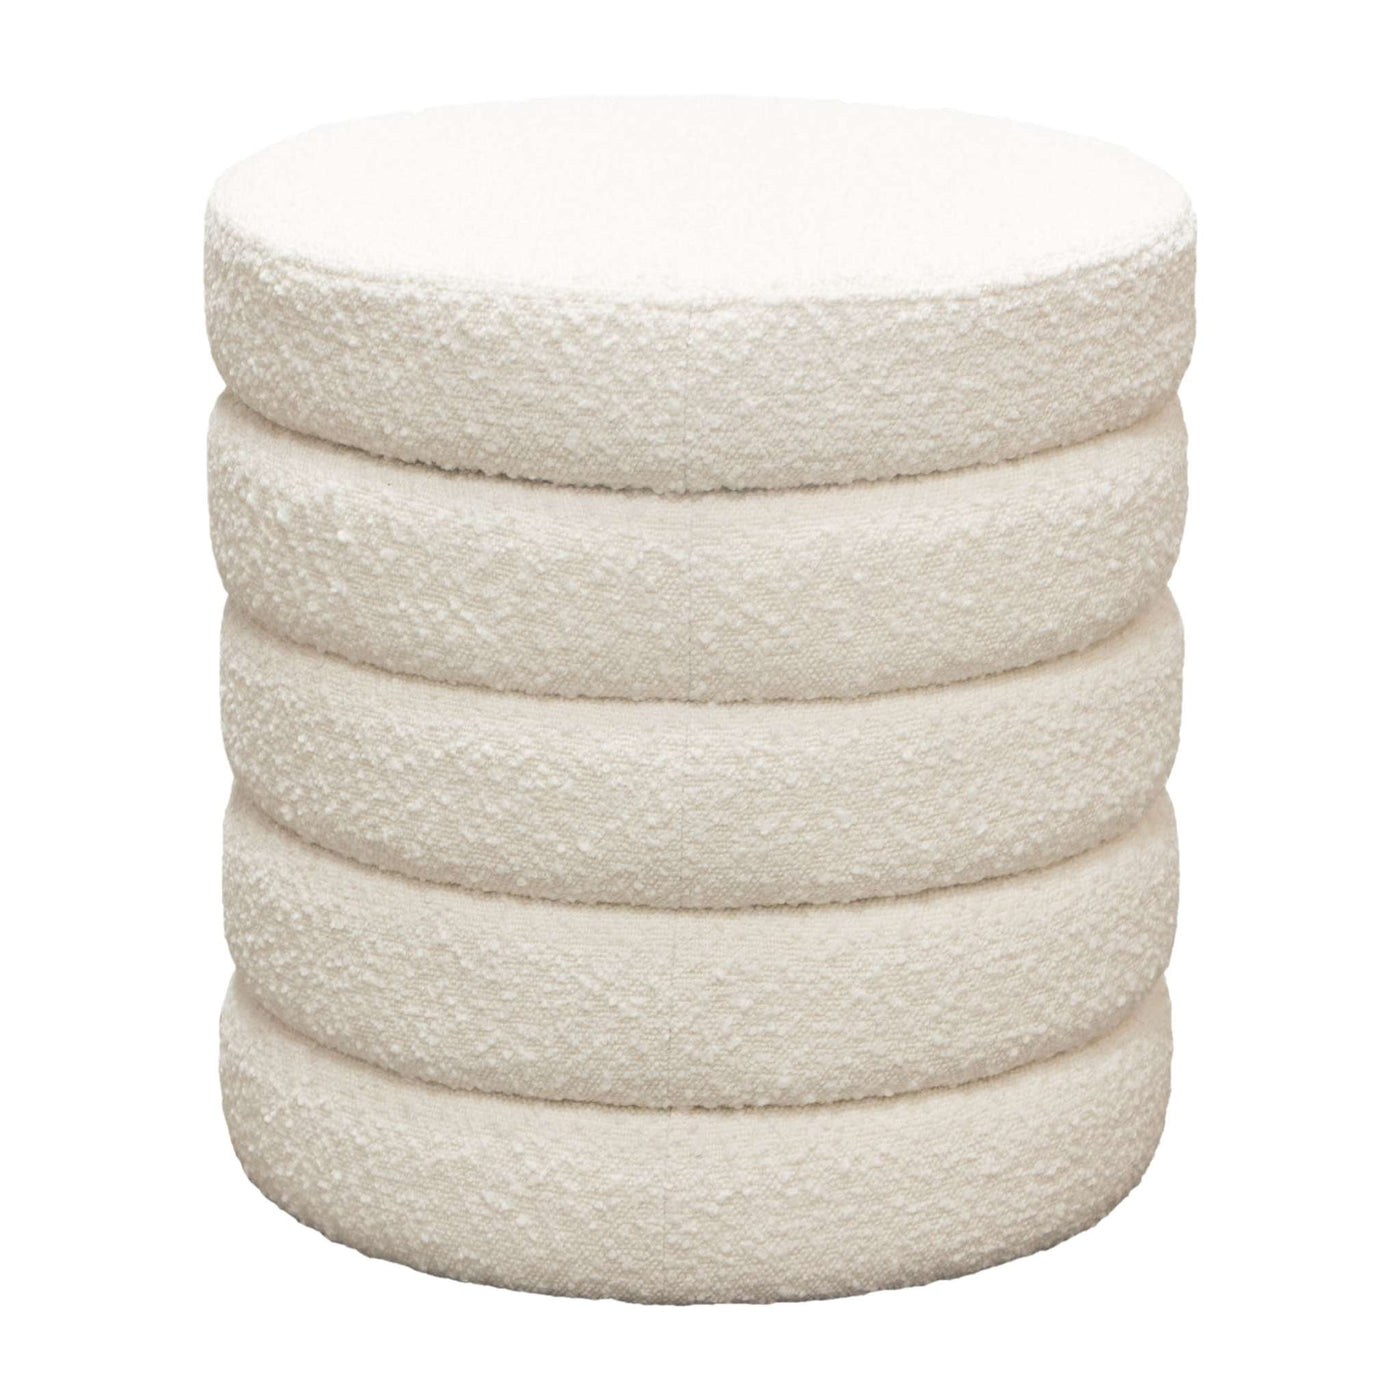 Helix Round Accent Ottoman in Ivory Boucle fabric by Diamond Sofa